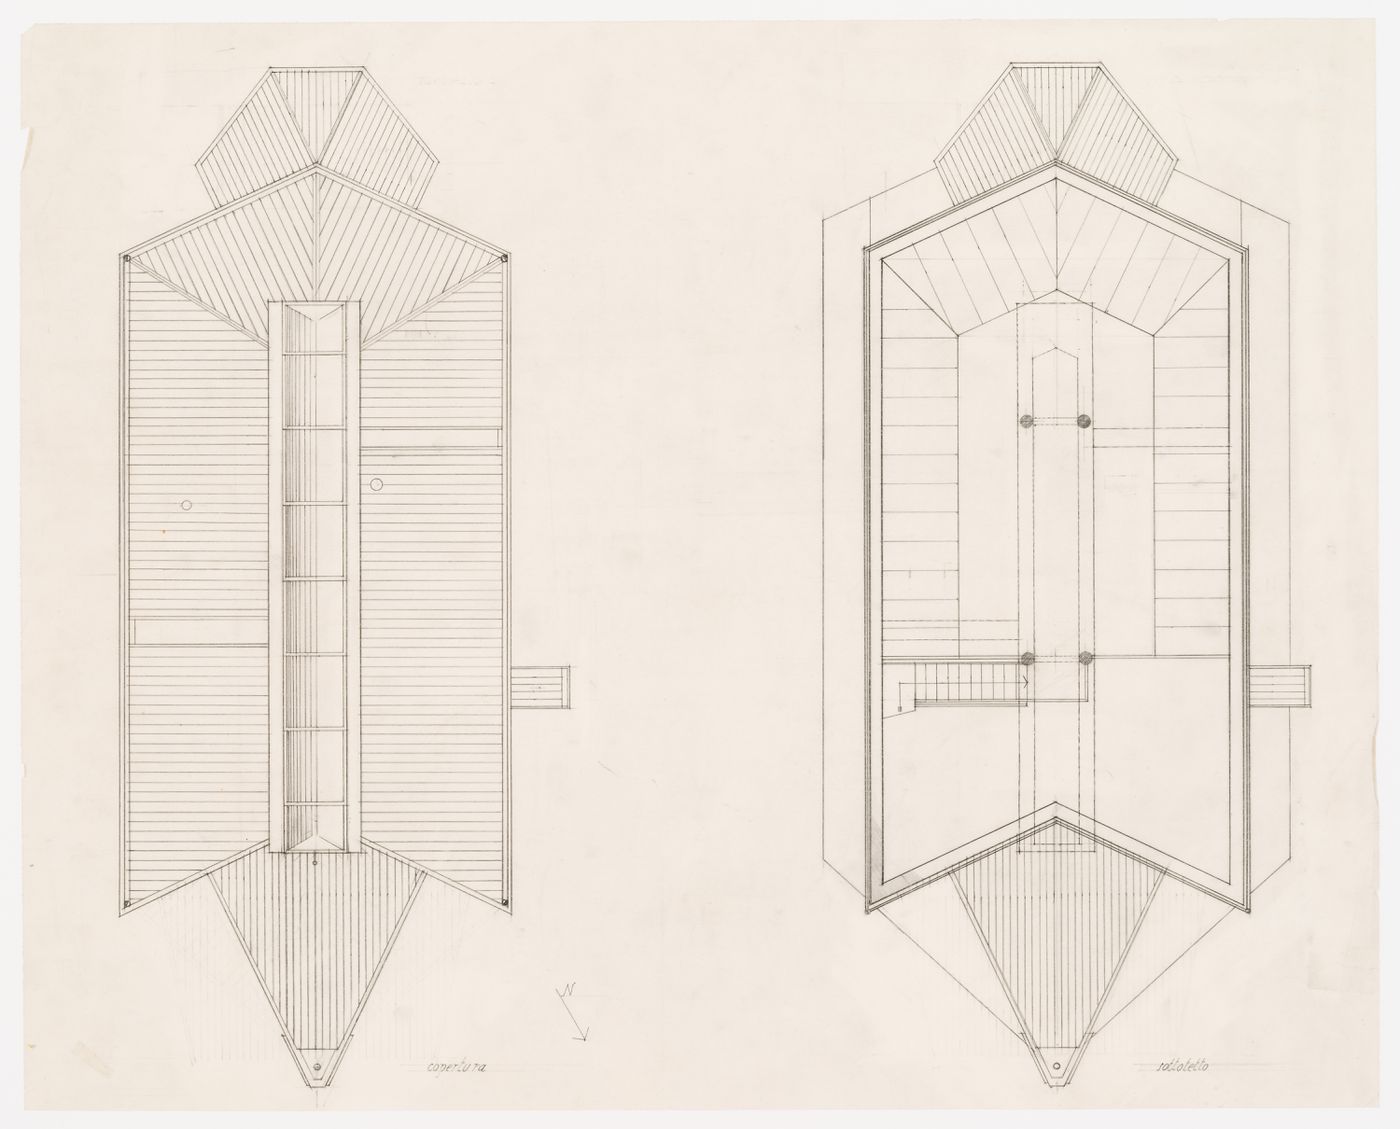 Plans of the roof and first floor for Casa Ferrario, Osmate, Italy